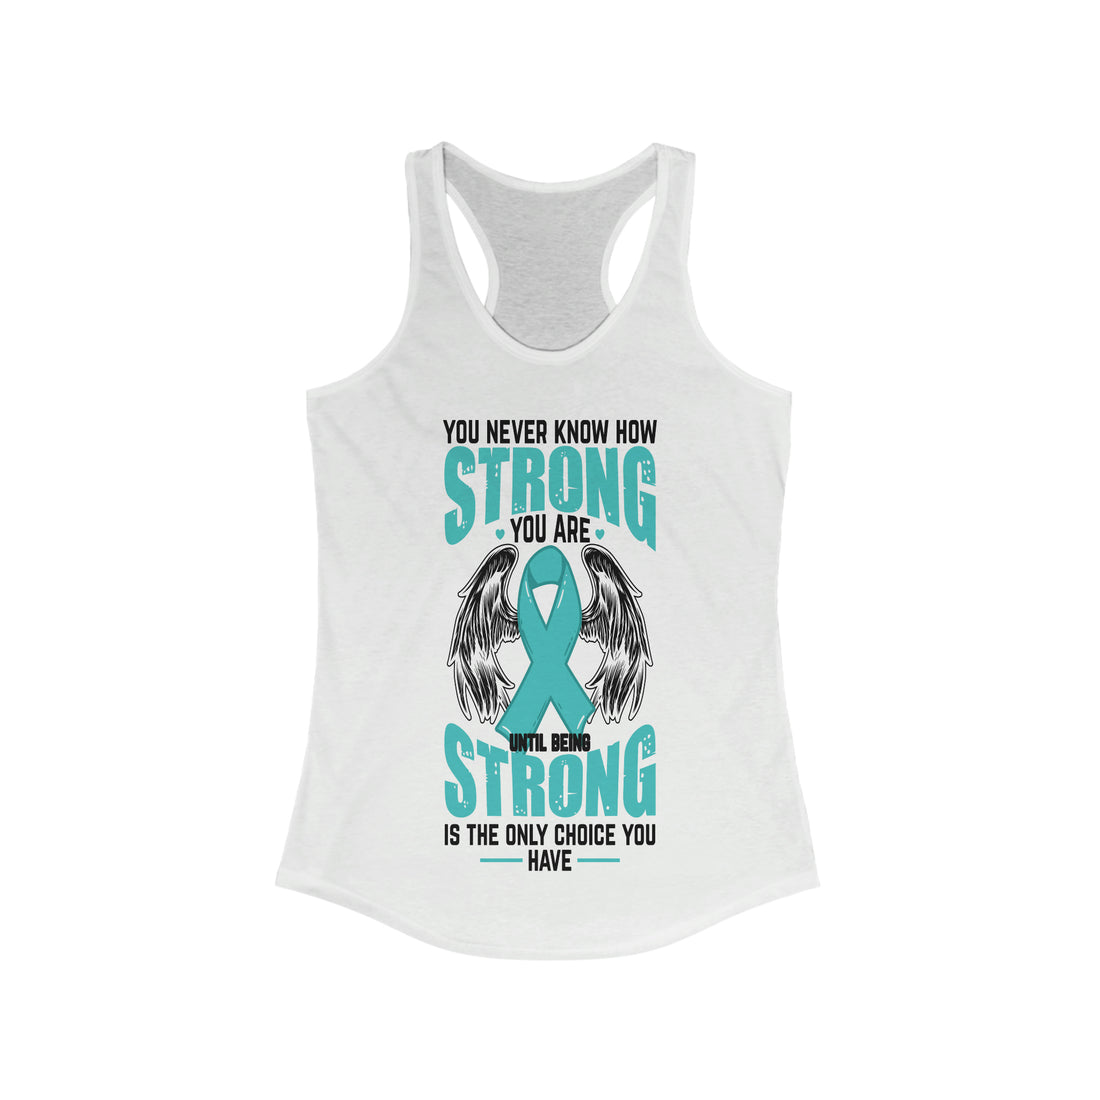 You Never Know How Strong You Are - Racerback Tank Top